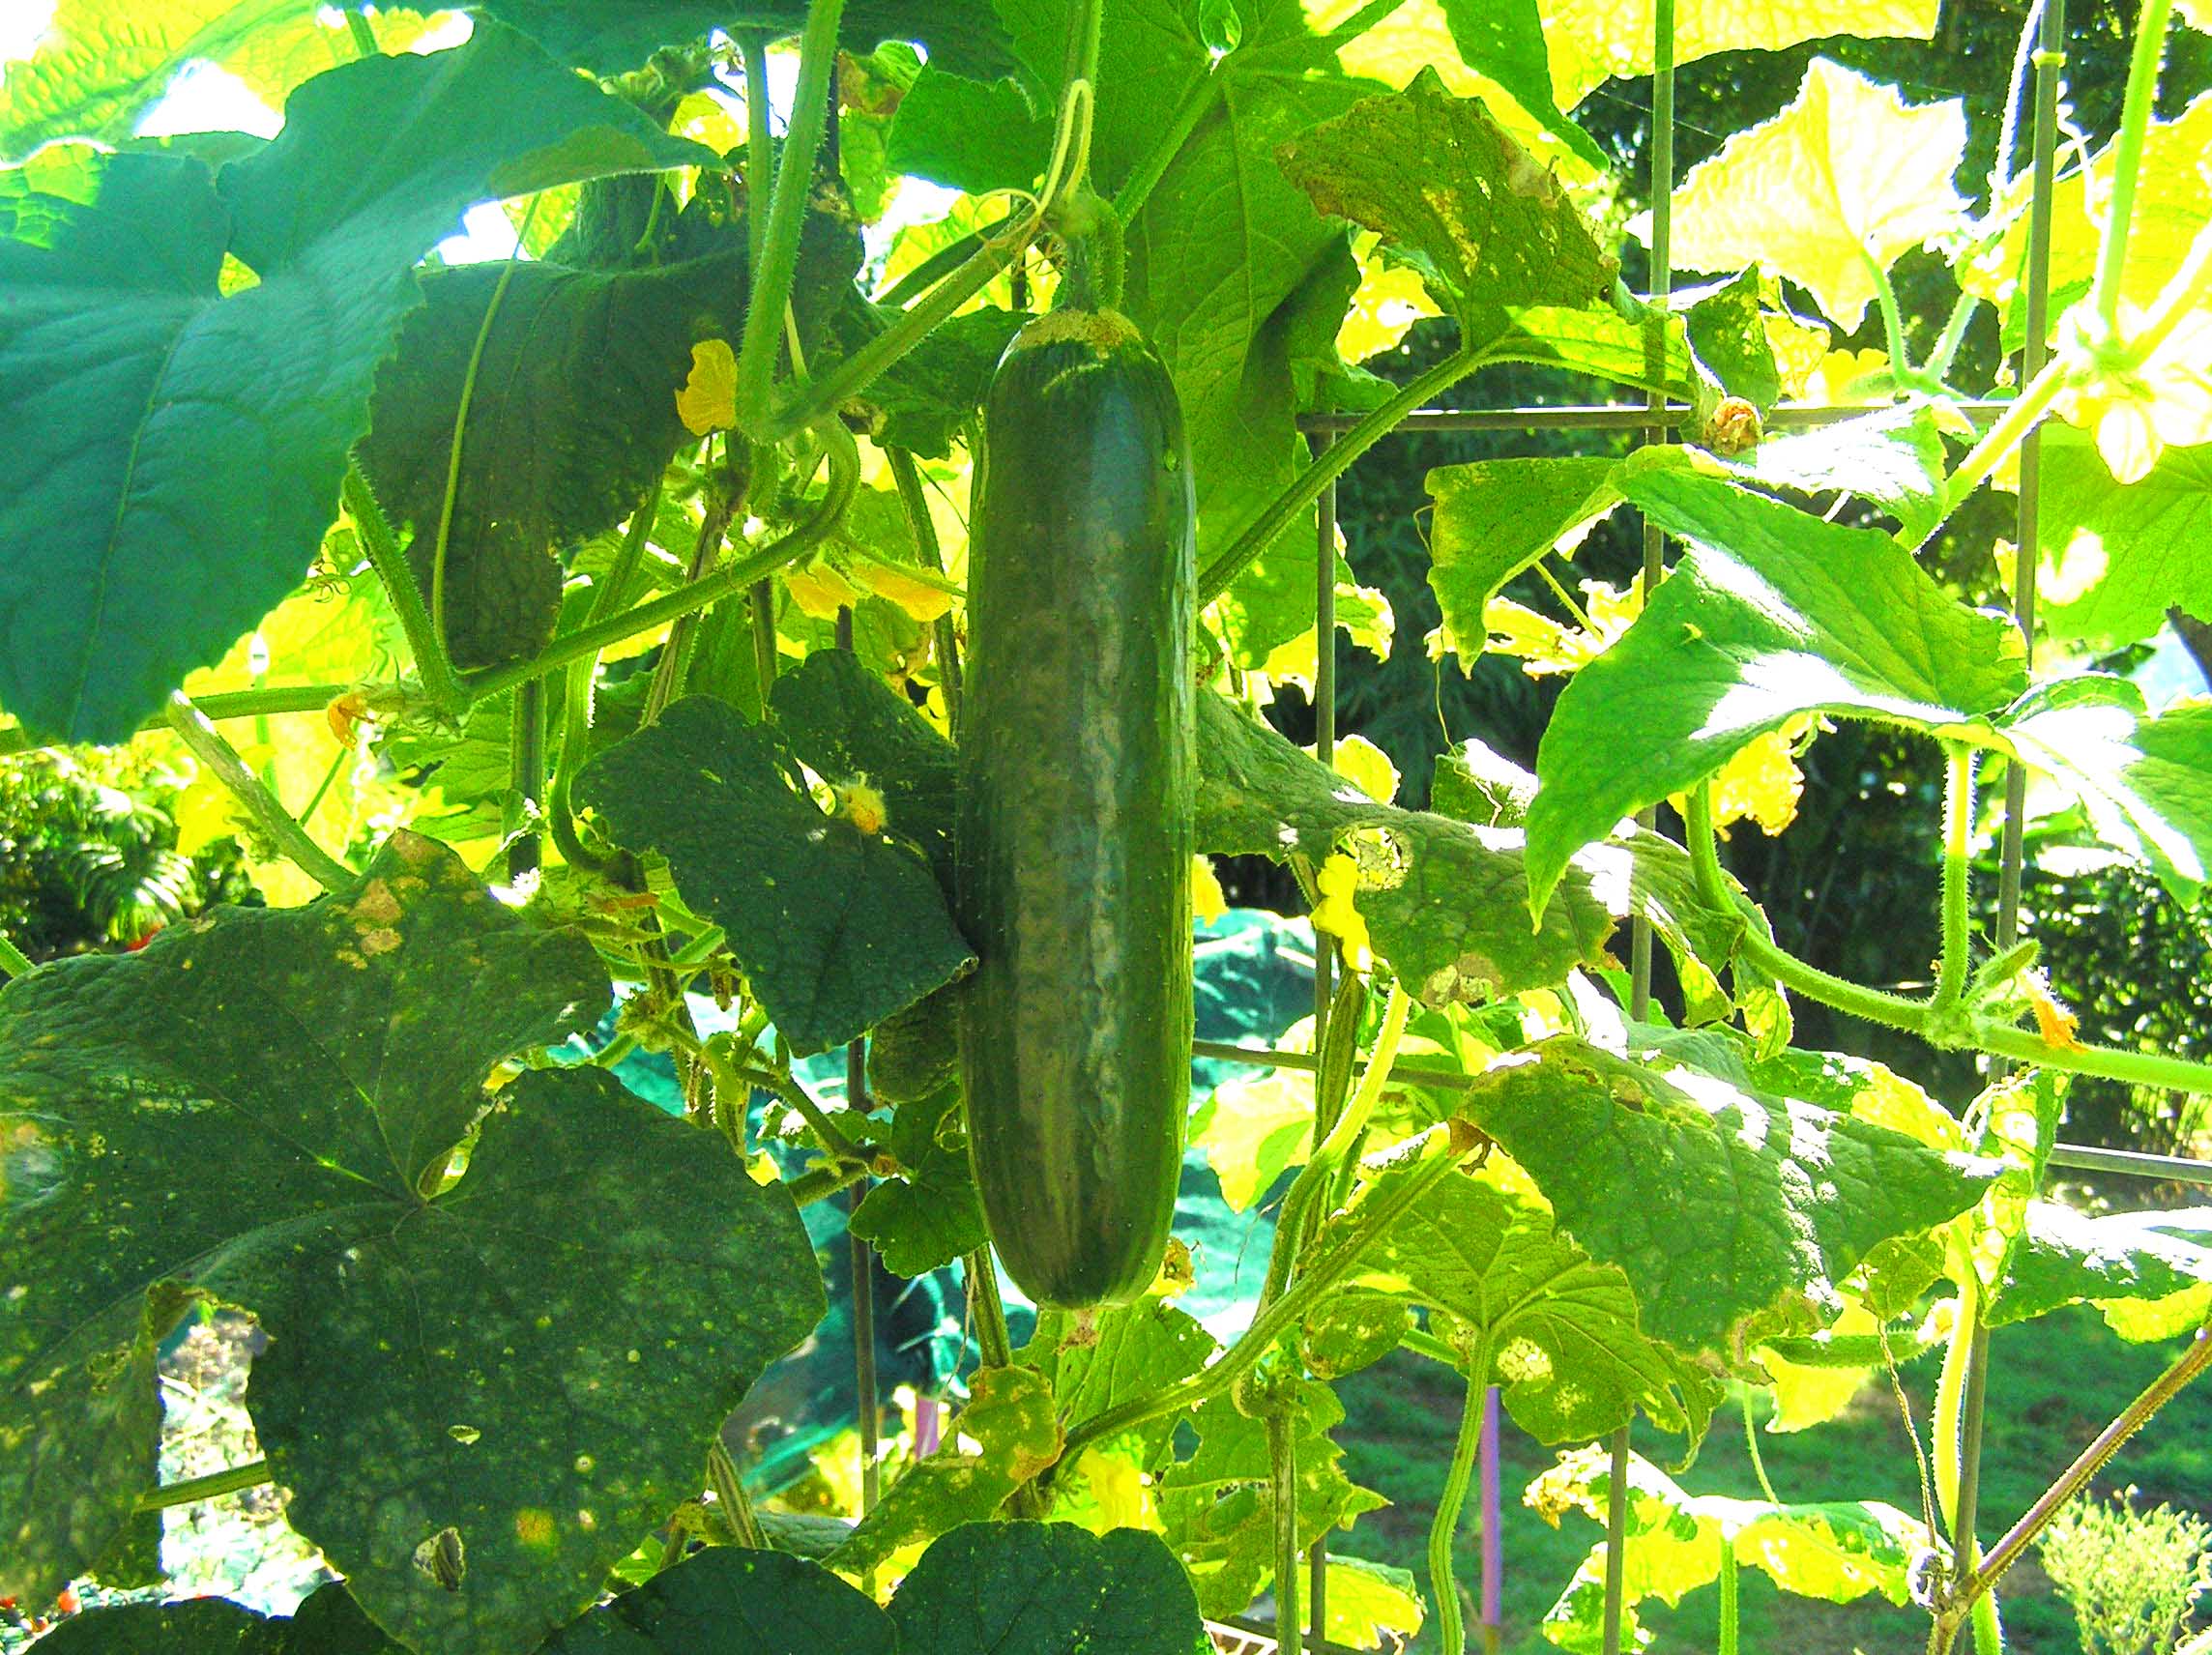 Need inspiration for your cucumber yields? Read on!